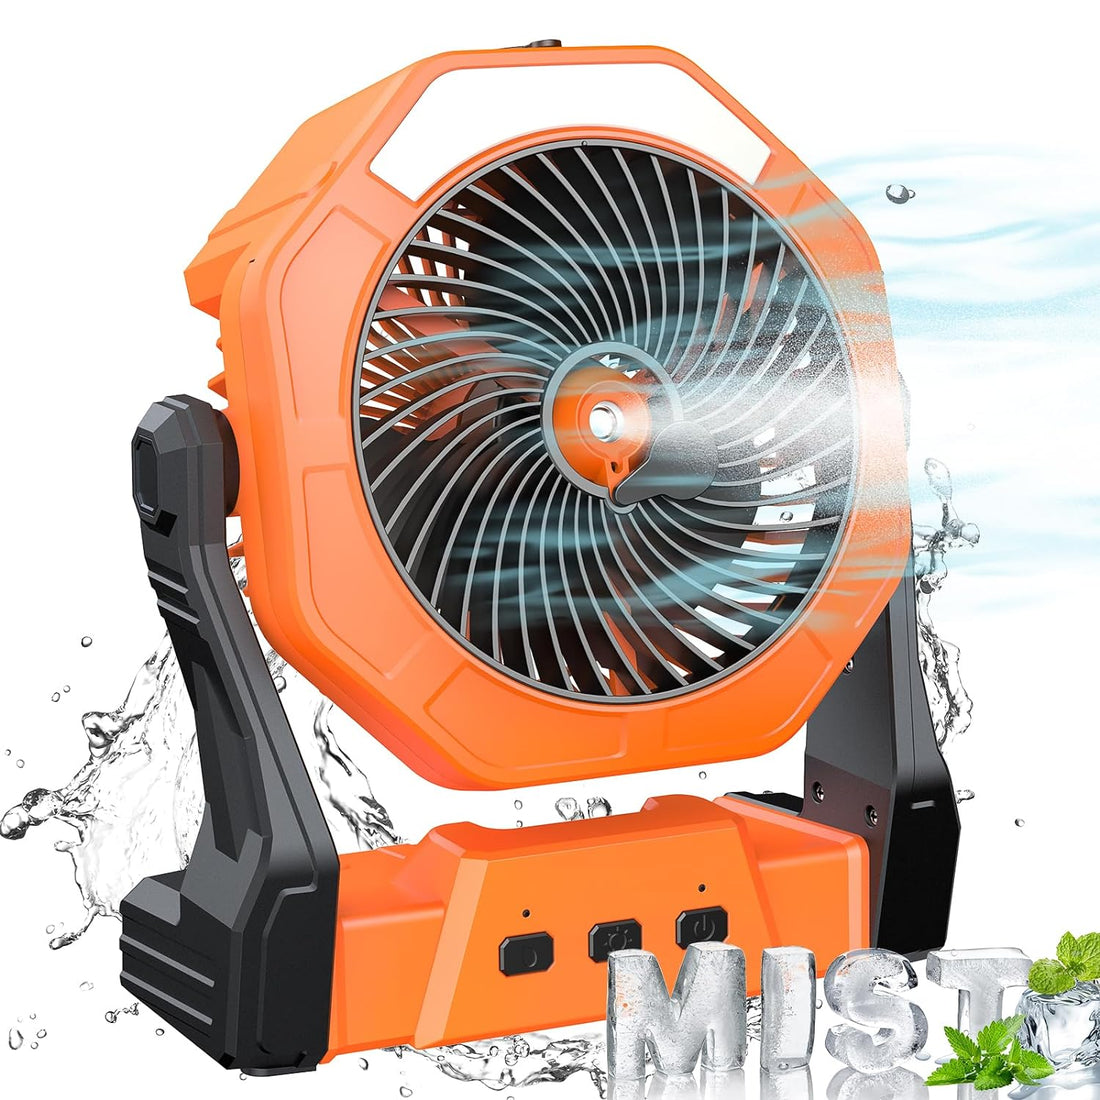 Portable Misting Fan, 8-Inch 10000mAh Rechargeable Battery Operated Fan, Personal Desk Fan with 250mL Water Tank & LED Lantern, Cooling Mist Fan for Home Desk, Patio, Camping, Outdoor&Indoor Use